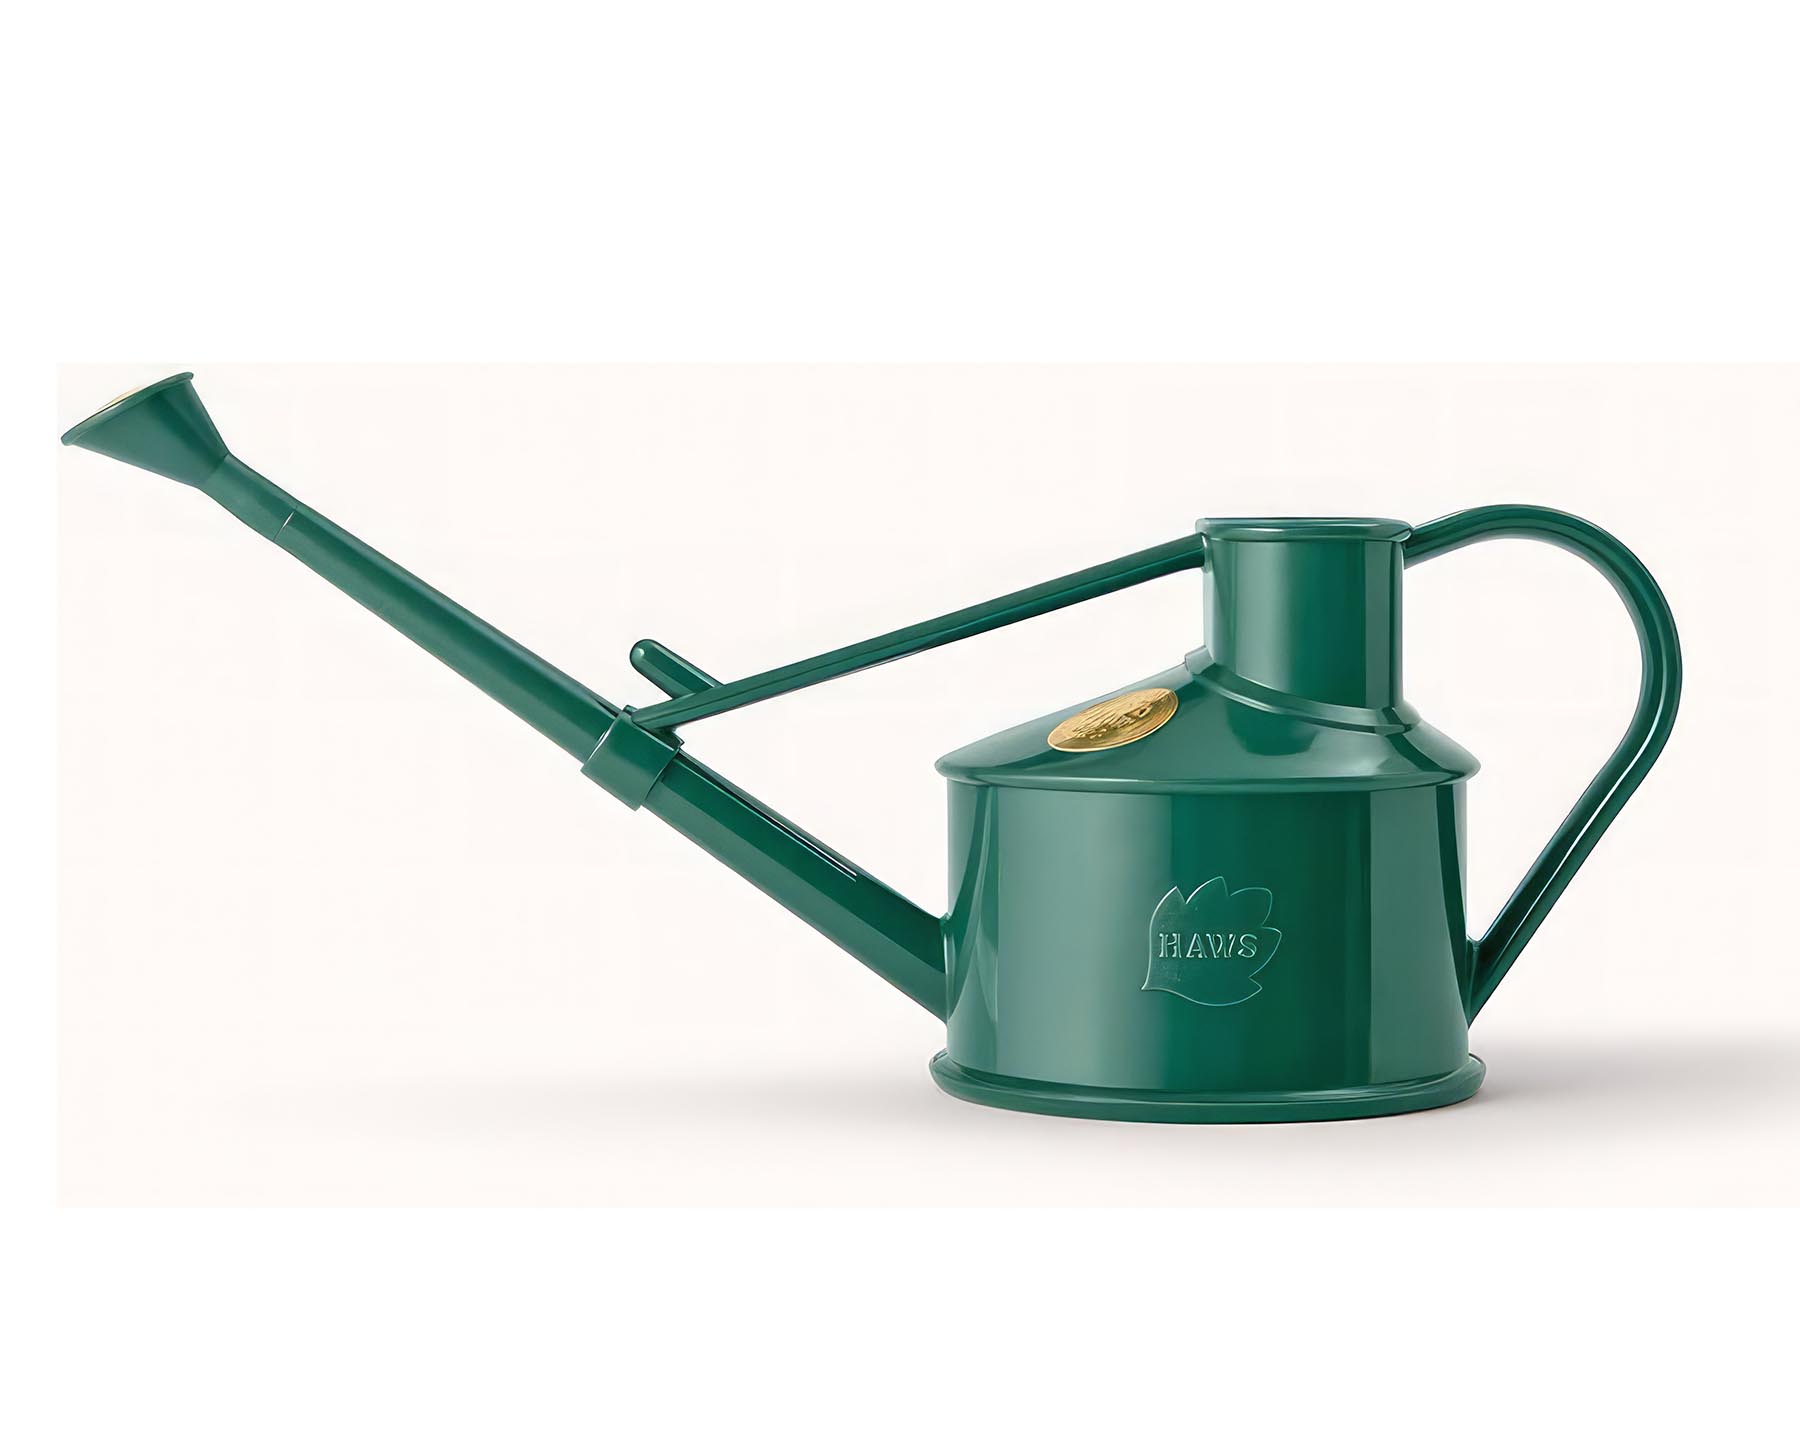 The Langley Sprinkler Watering Can - 500ml by Haws - Green